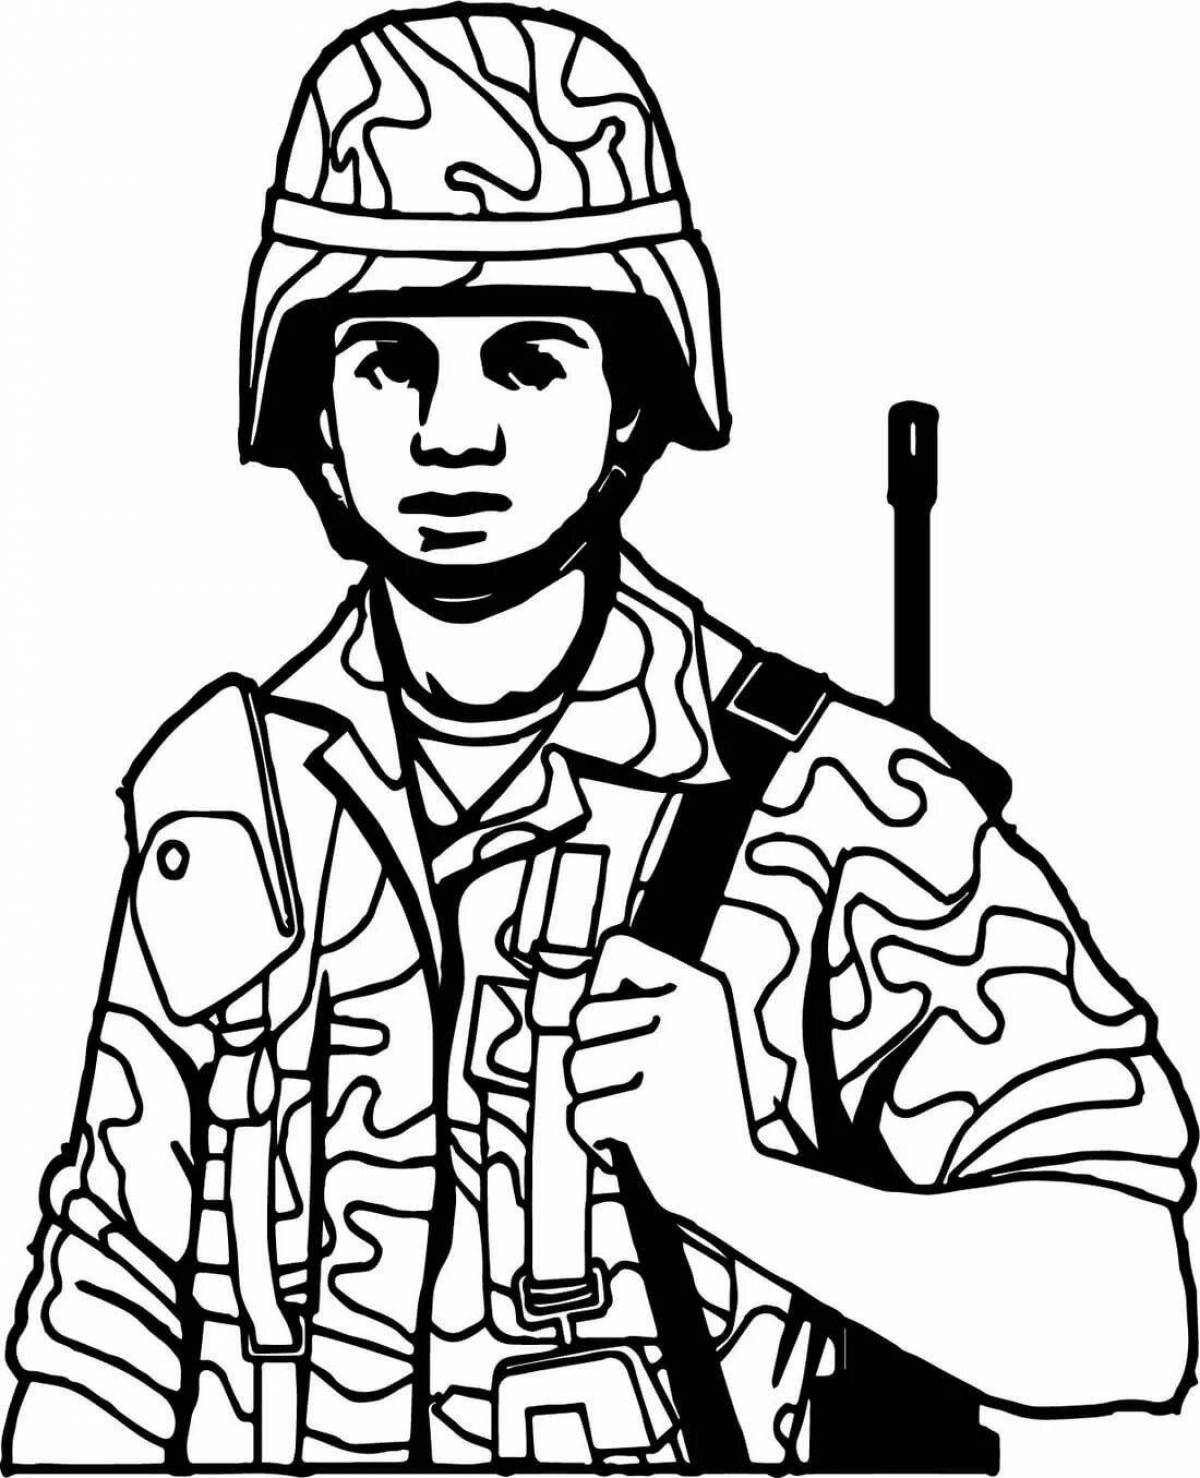 Dazzling soldier face coloring page for kids